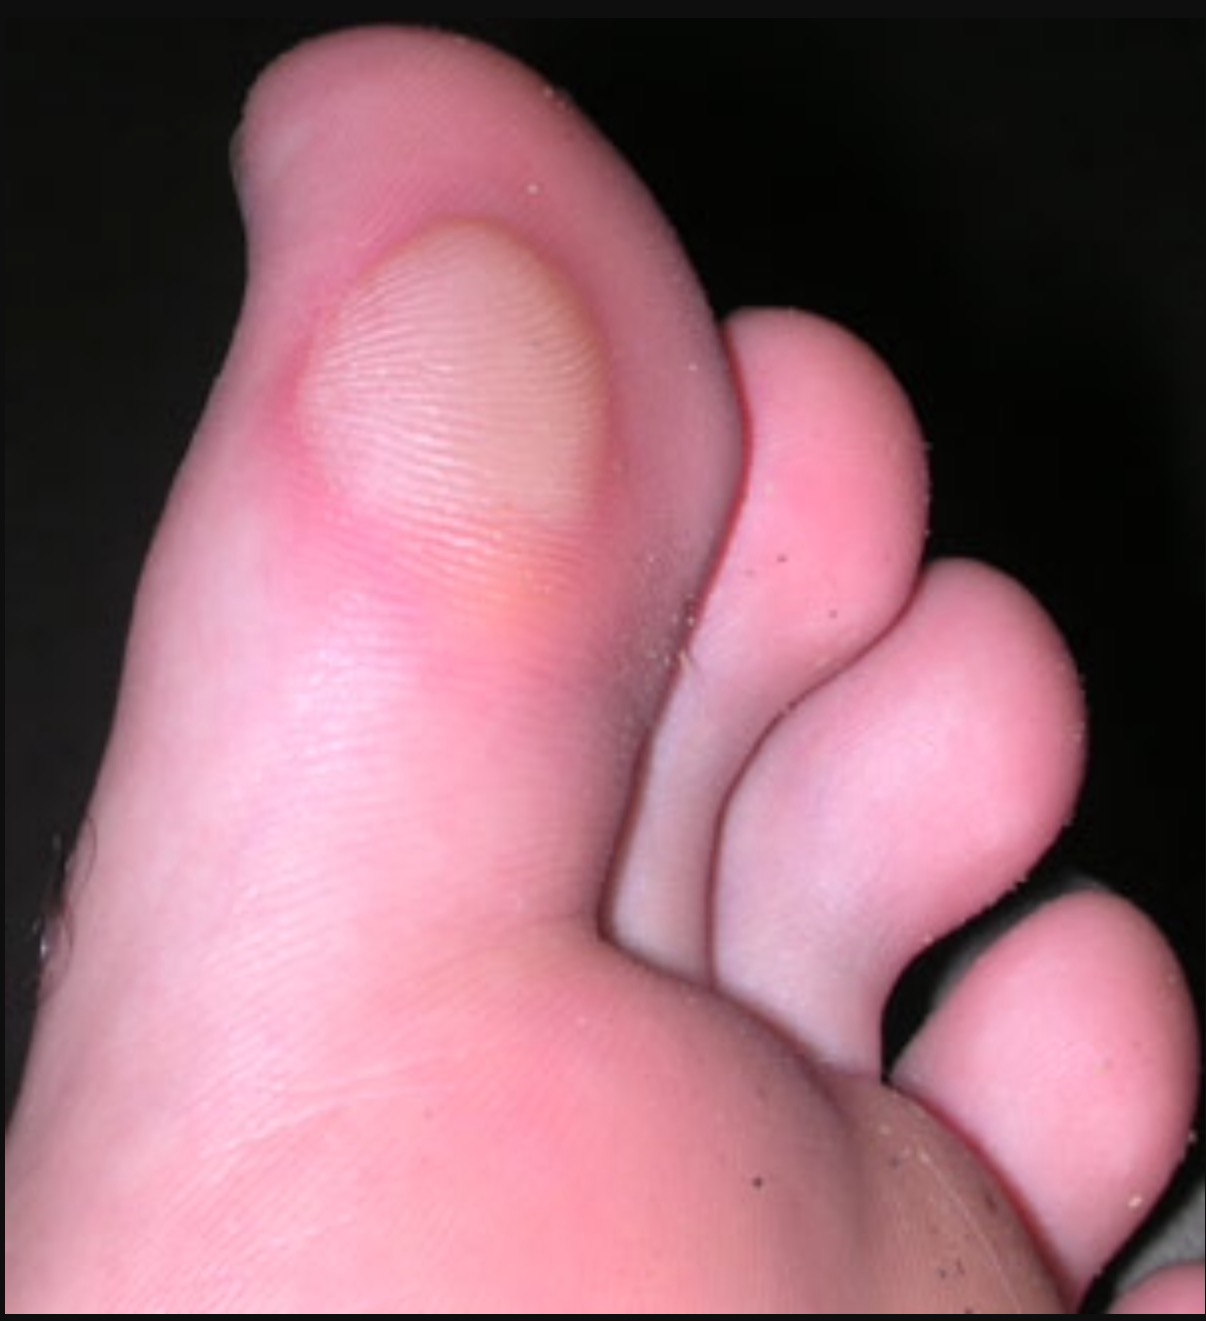 blister on my toe